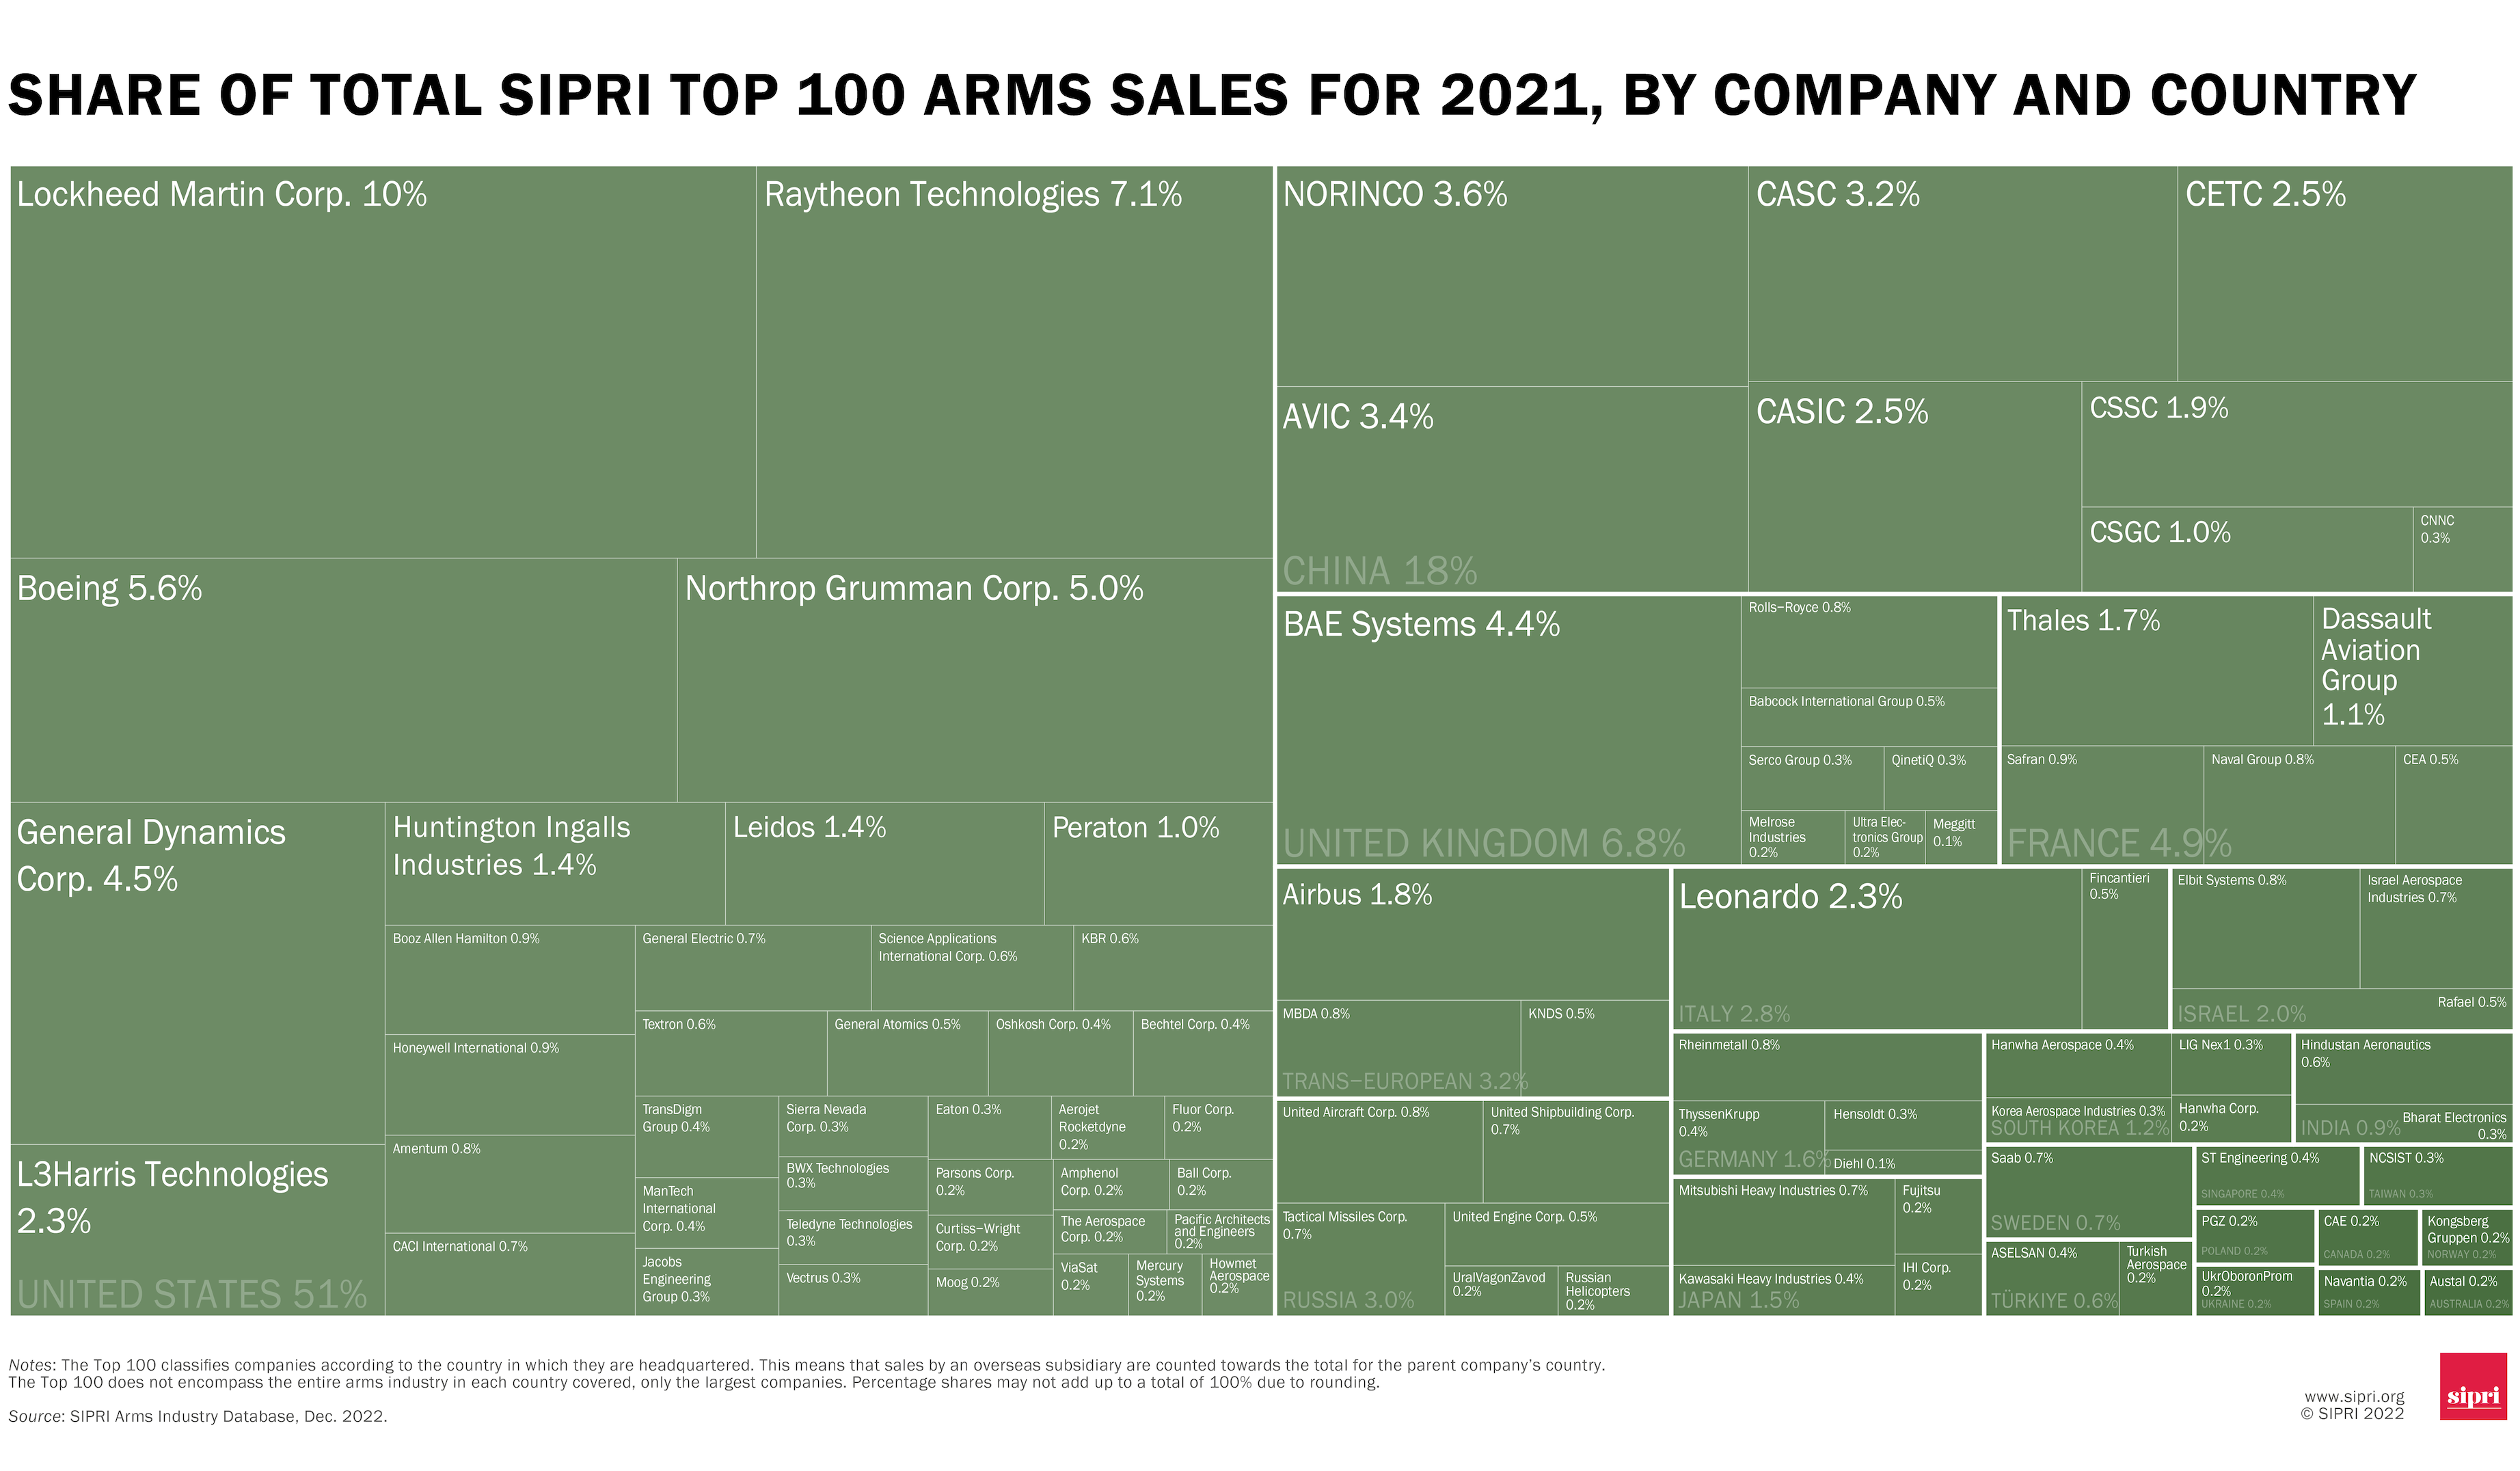 Link to Share of total SIPRI Top 100 arms sales for 2021, by company and country.